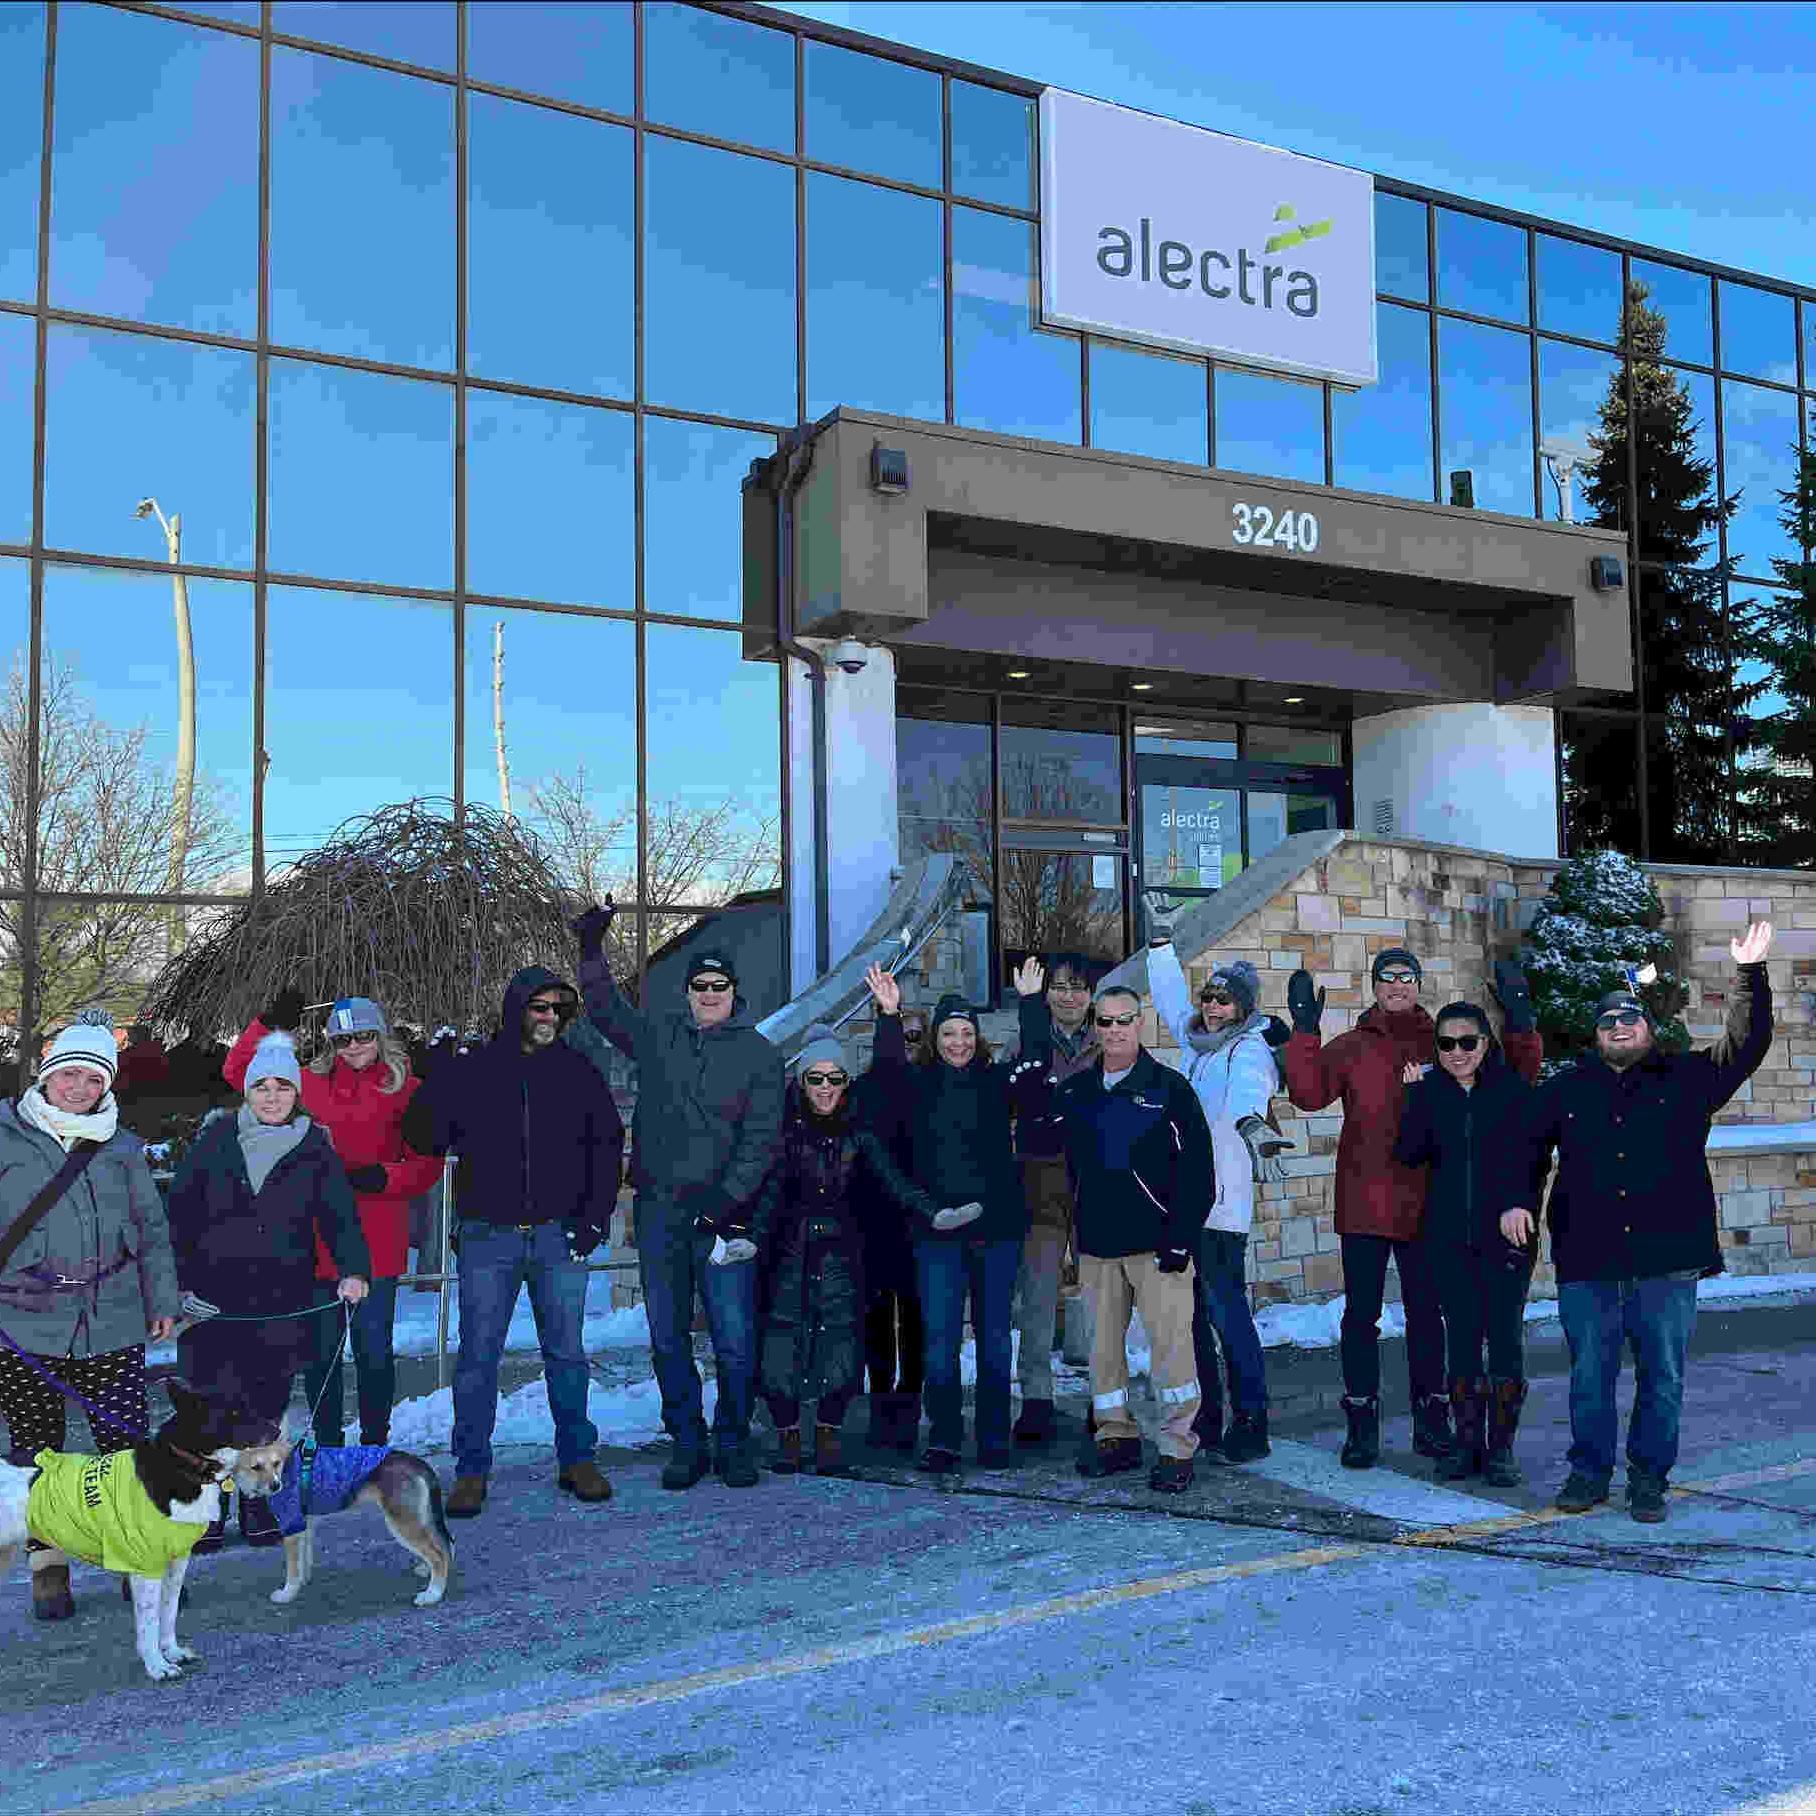 Alectra employees in the Coldest Night of the Year Walk